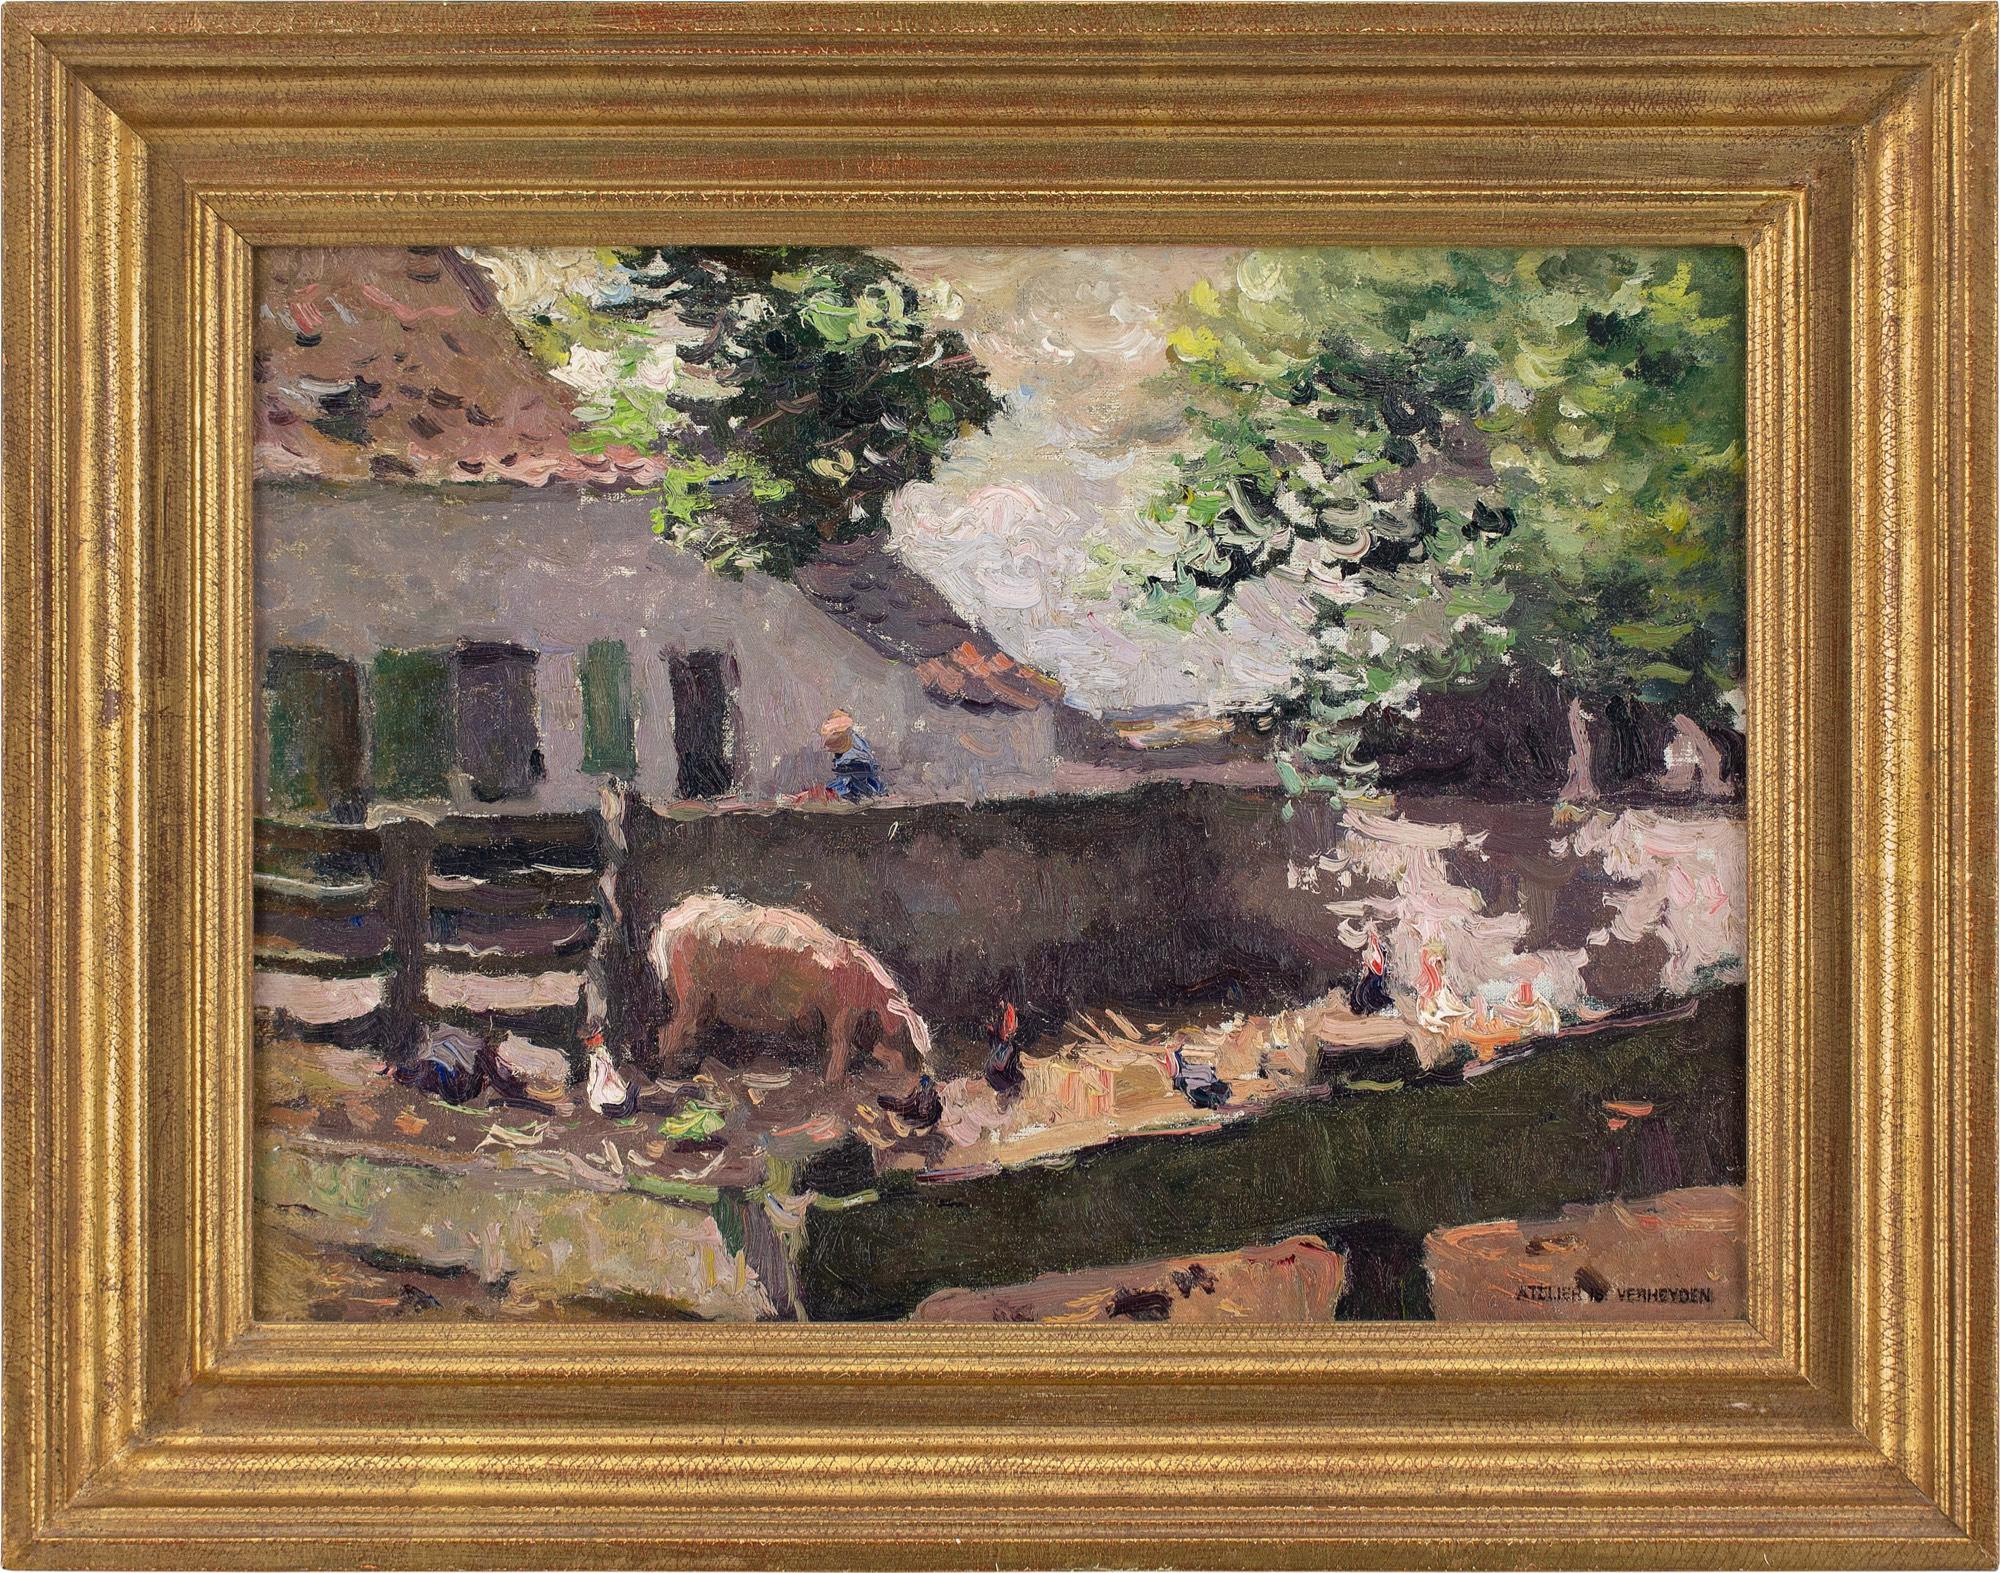 This late 19th-century oil painting by Belgian artist Isidore Verheyden (1846-1905) depicts a small farmyard.

Snuffling and grunting amid the grubby hay, a chubby pig with a muddy nose. The king of its pen, surrounded by poultry, rummaging for